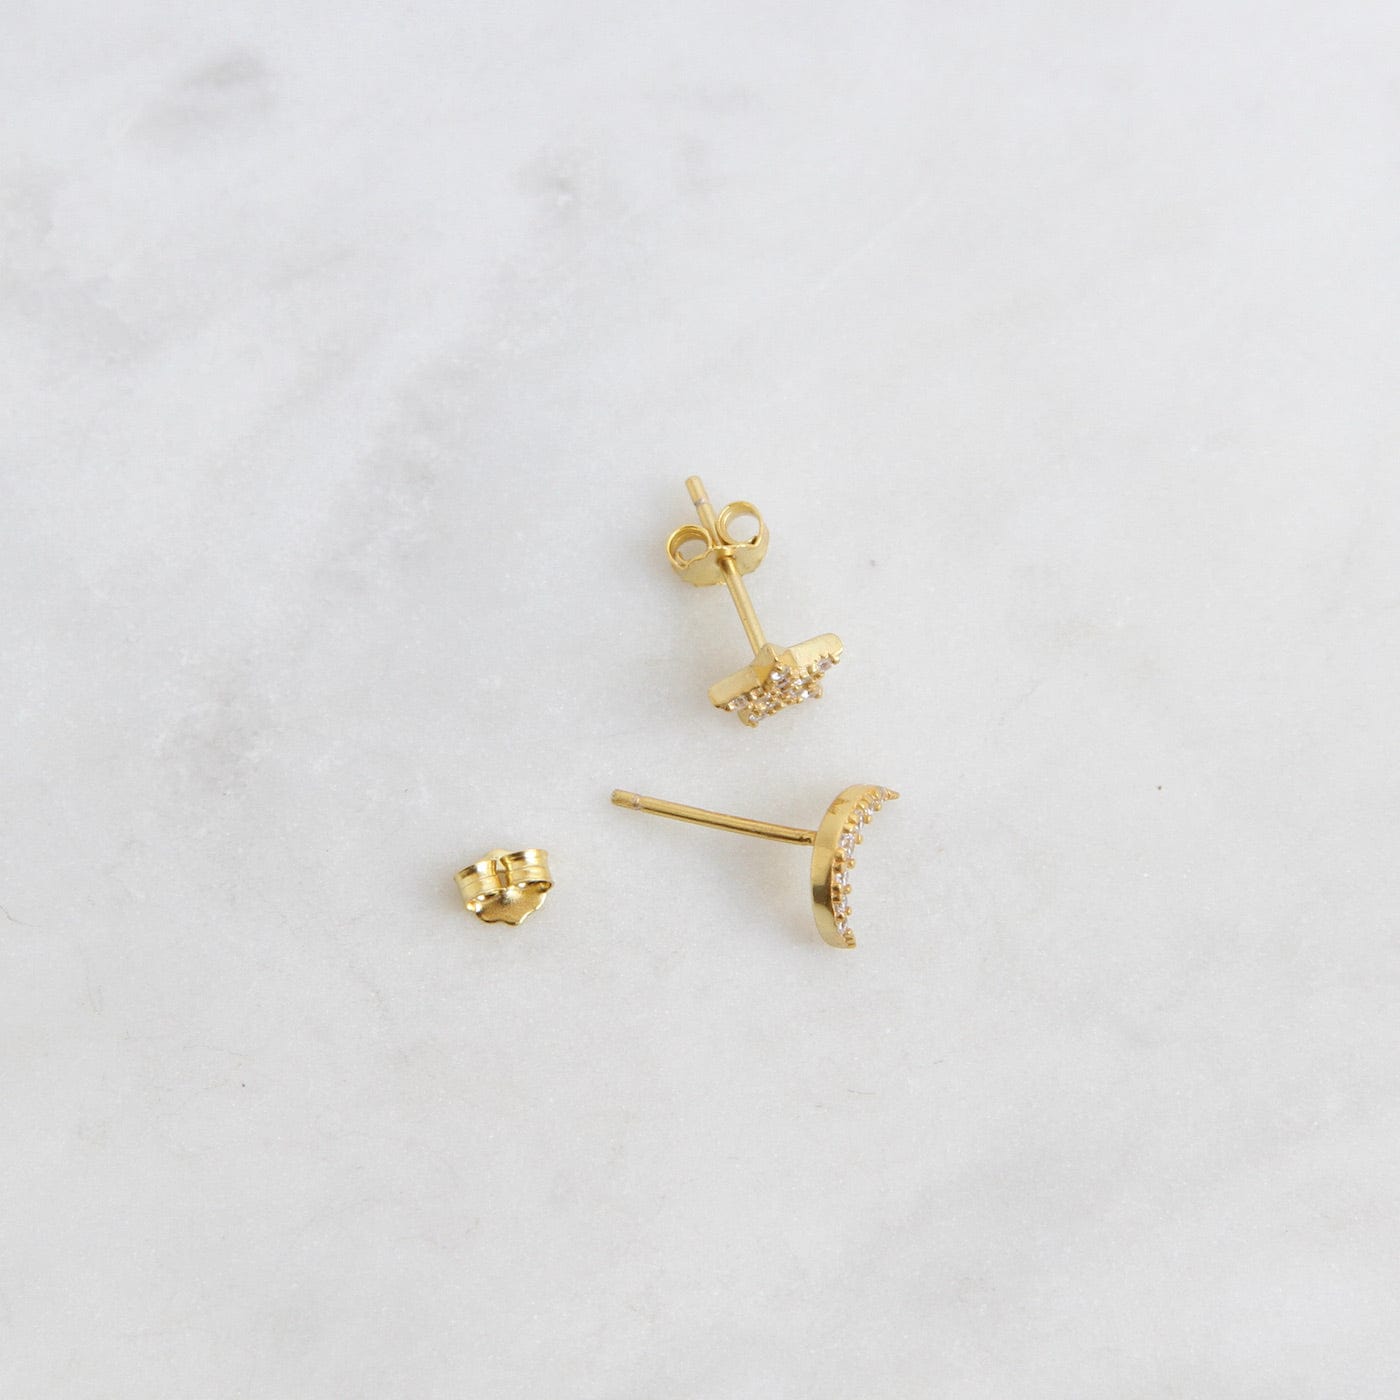 EAR-GPL Celestial Studs - 18K Gold Plated Silver